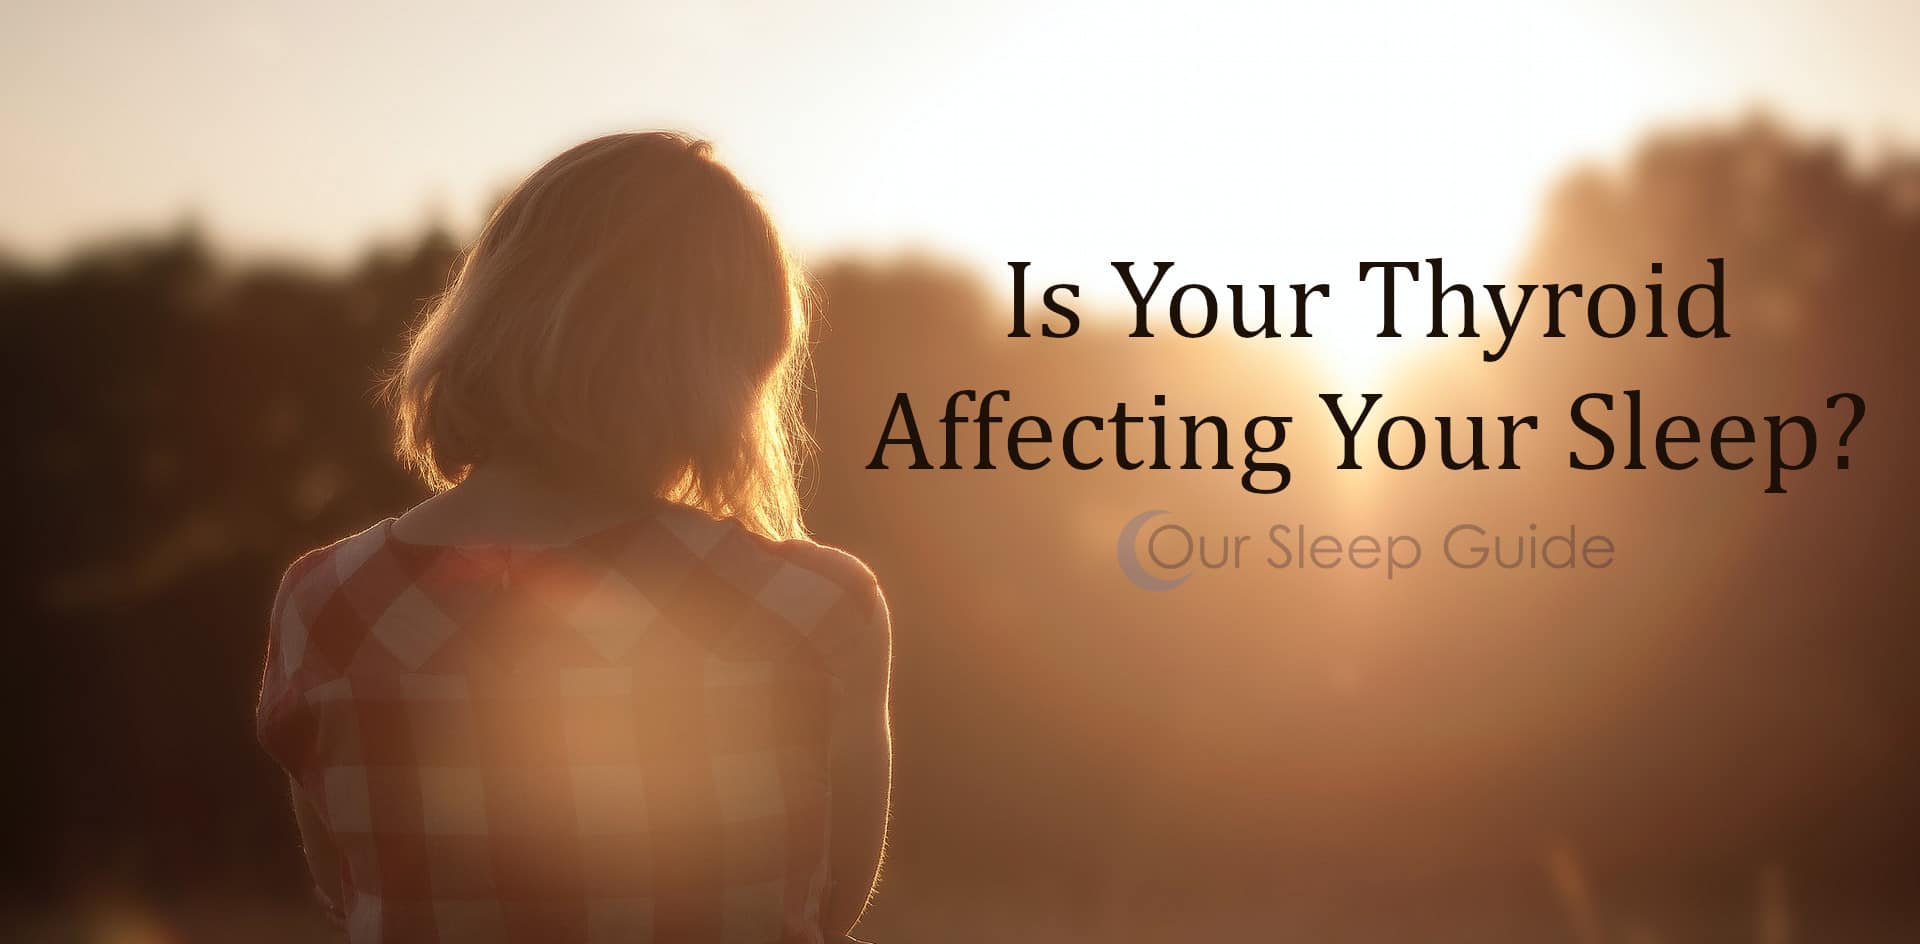 is your thyroid affecting your sleep negatively?